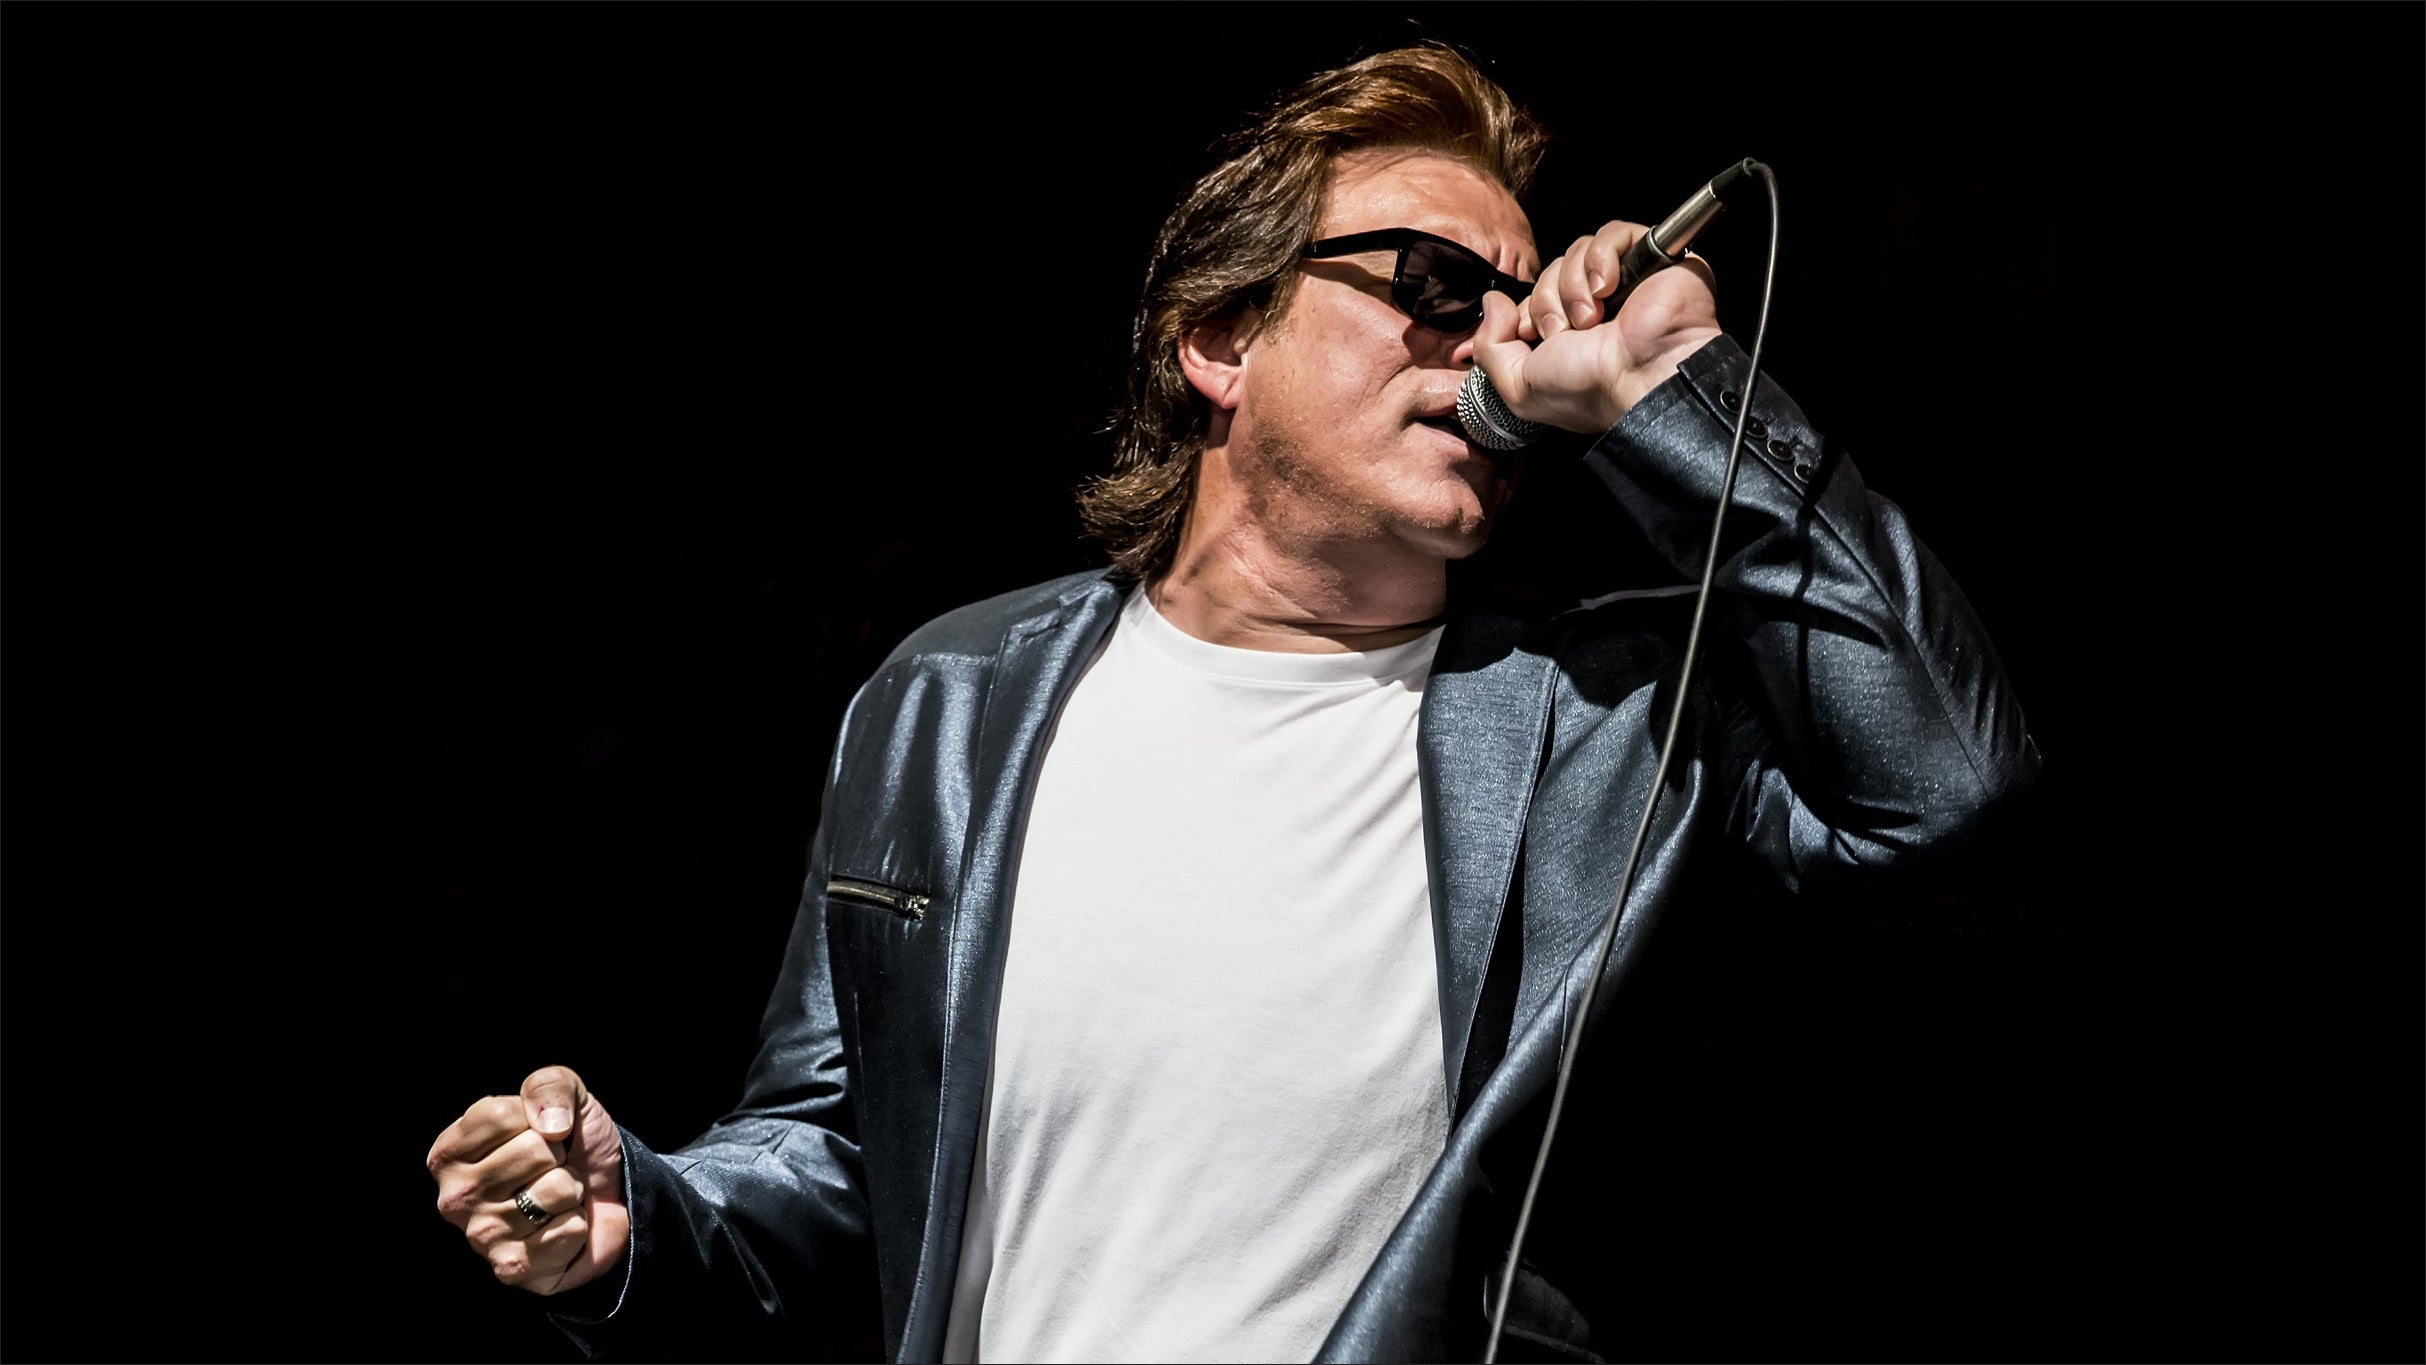 The Heart Of Rock & Roll - A Tribute To Huey Lewis & The News in Huntington promo photo for Official Platinum presale offer code